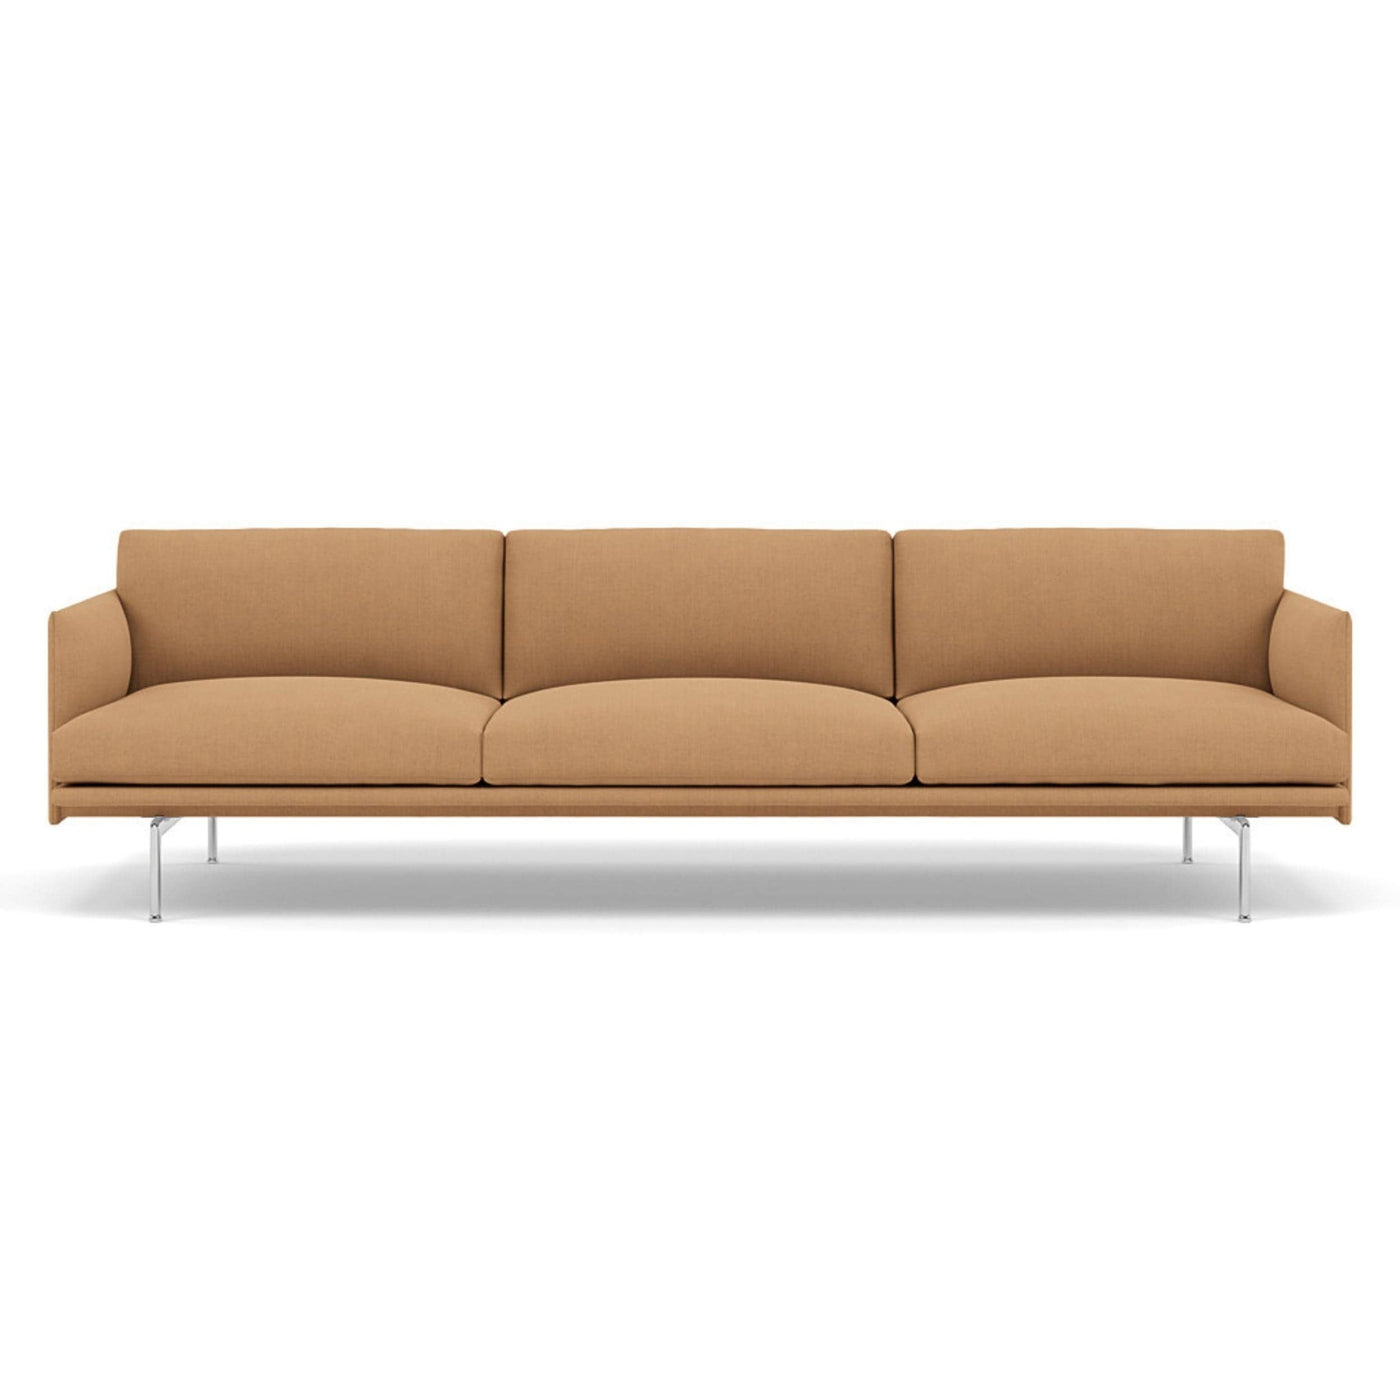 muuto outline 3.5 seater sofa in fiord 451 and polished aluminium legs. Made to order from someday designs. #colour_fiord-451